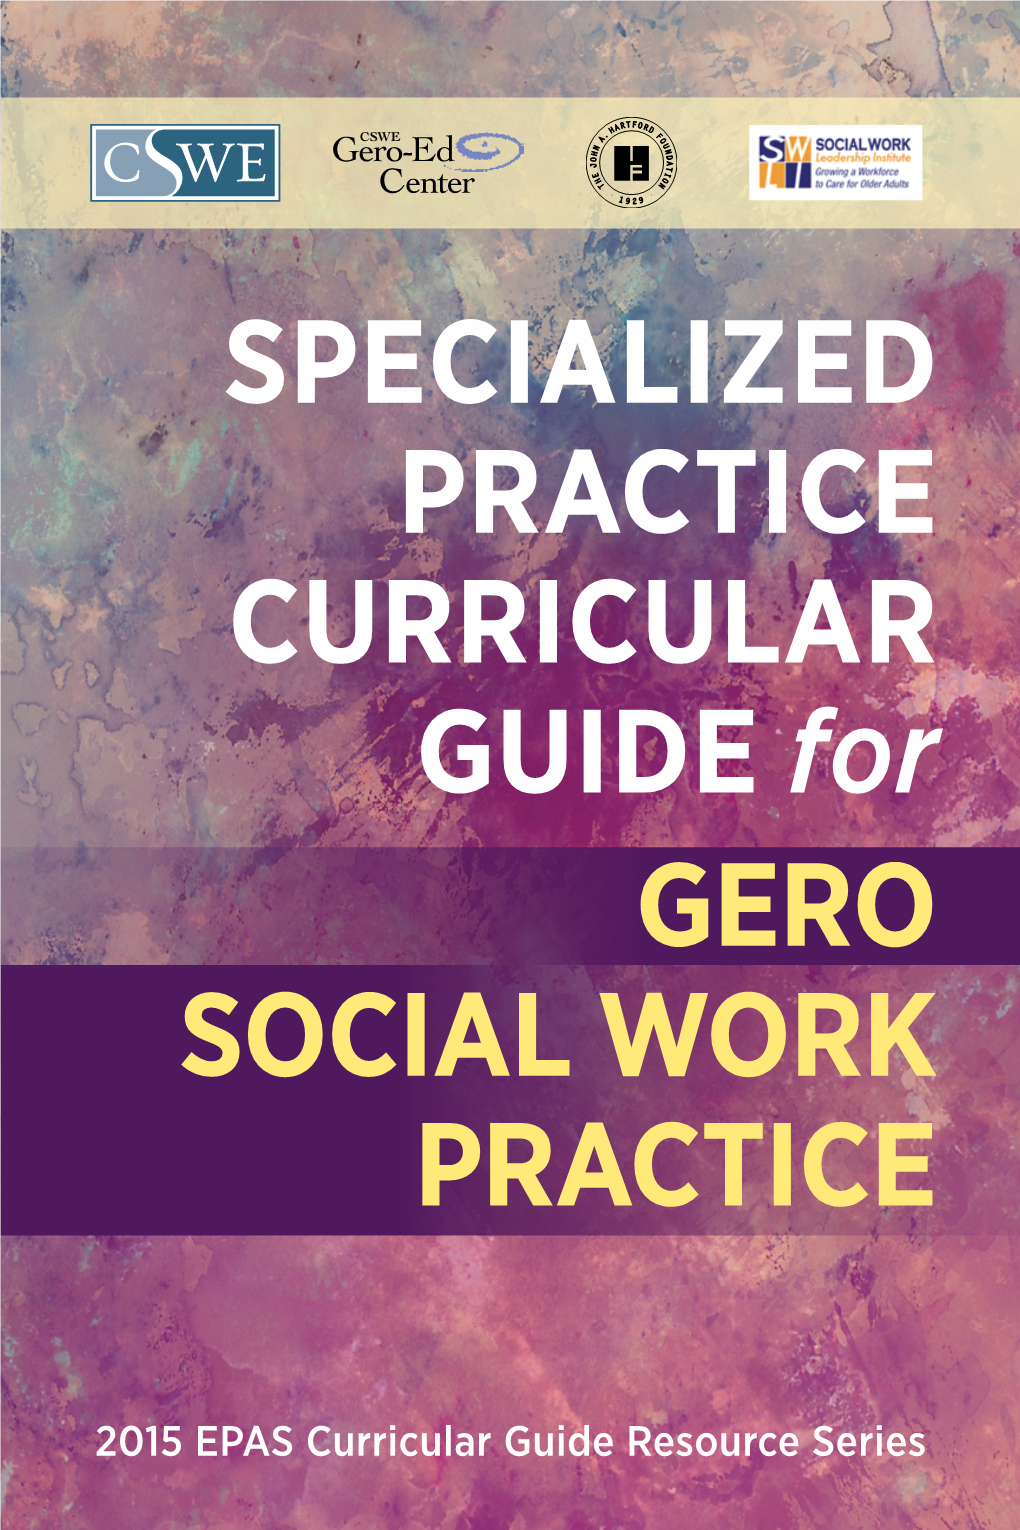 SPECIALIZED PRACTICE CURRICULAR GUIDE for GERO SOCIAL WORK PRACTICE